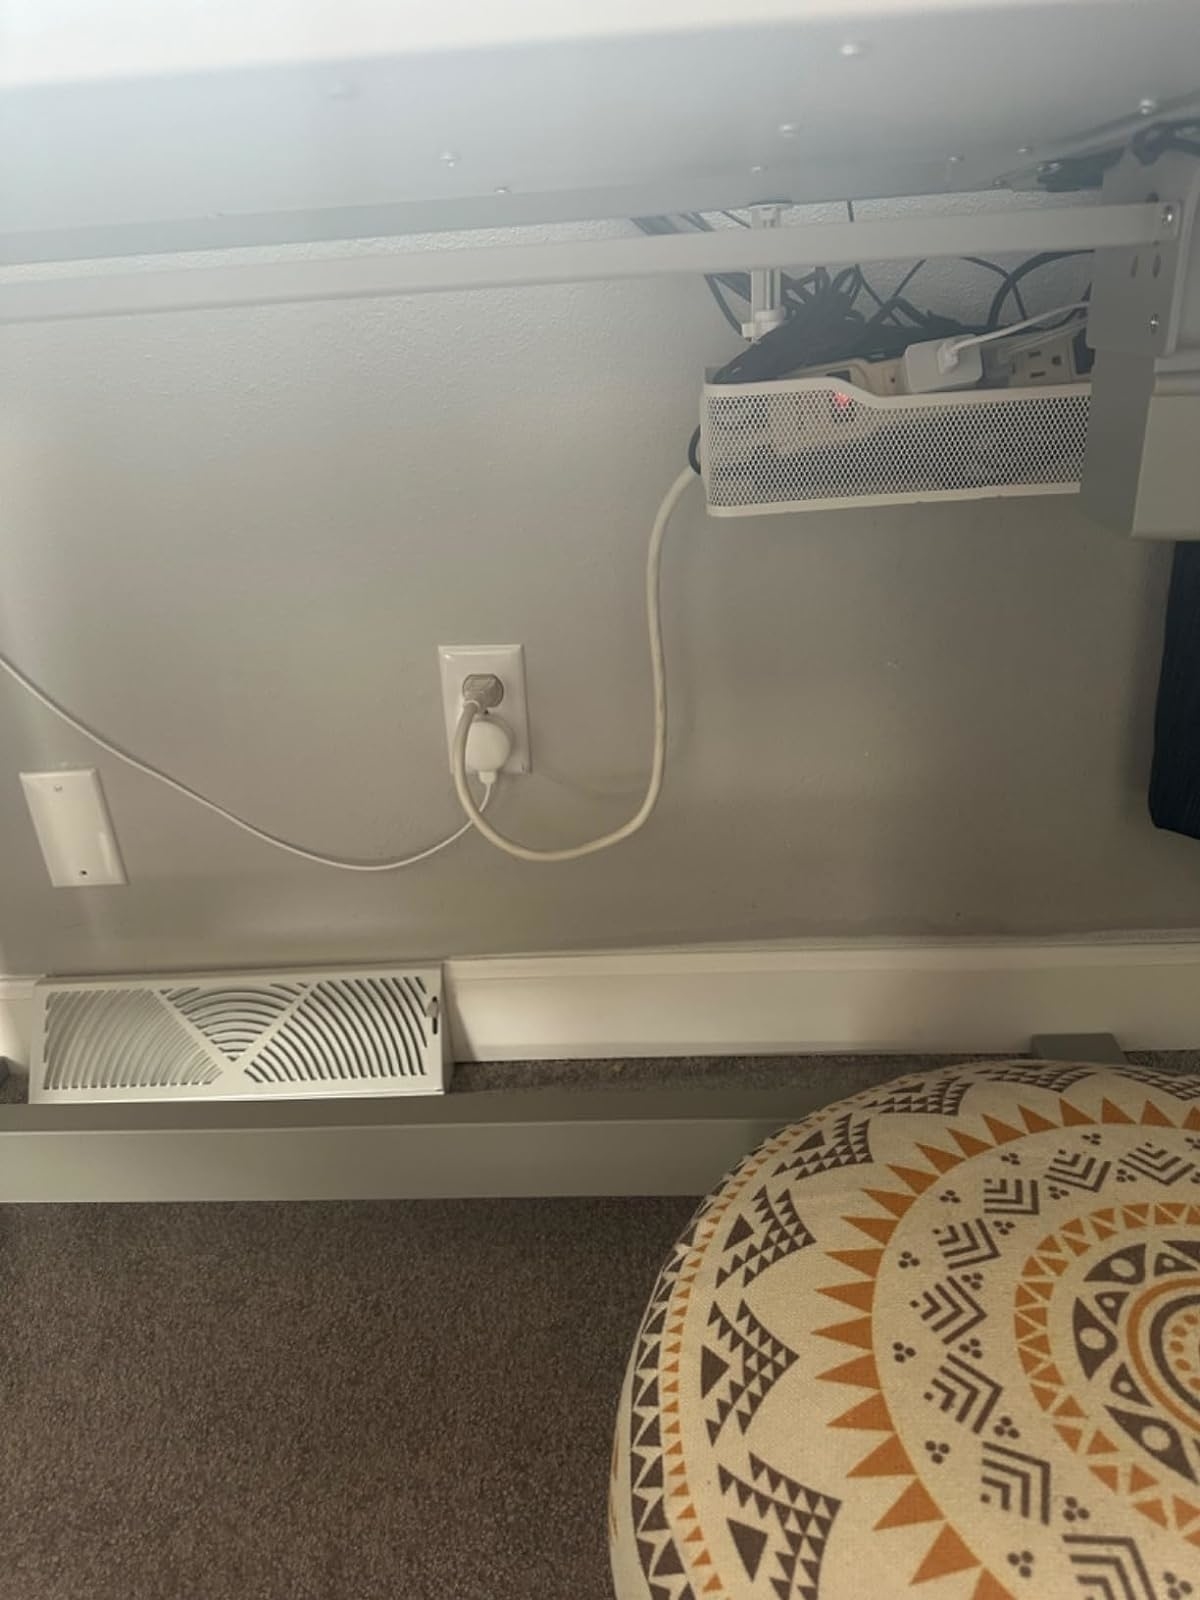 Power strip and cables organized under a desk next to a patterned ottoman